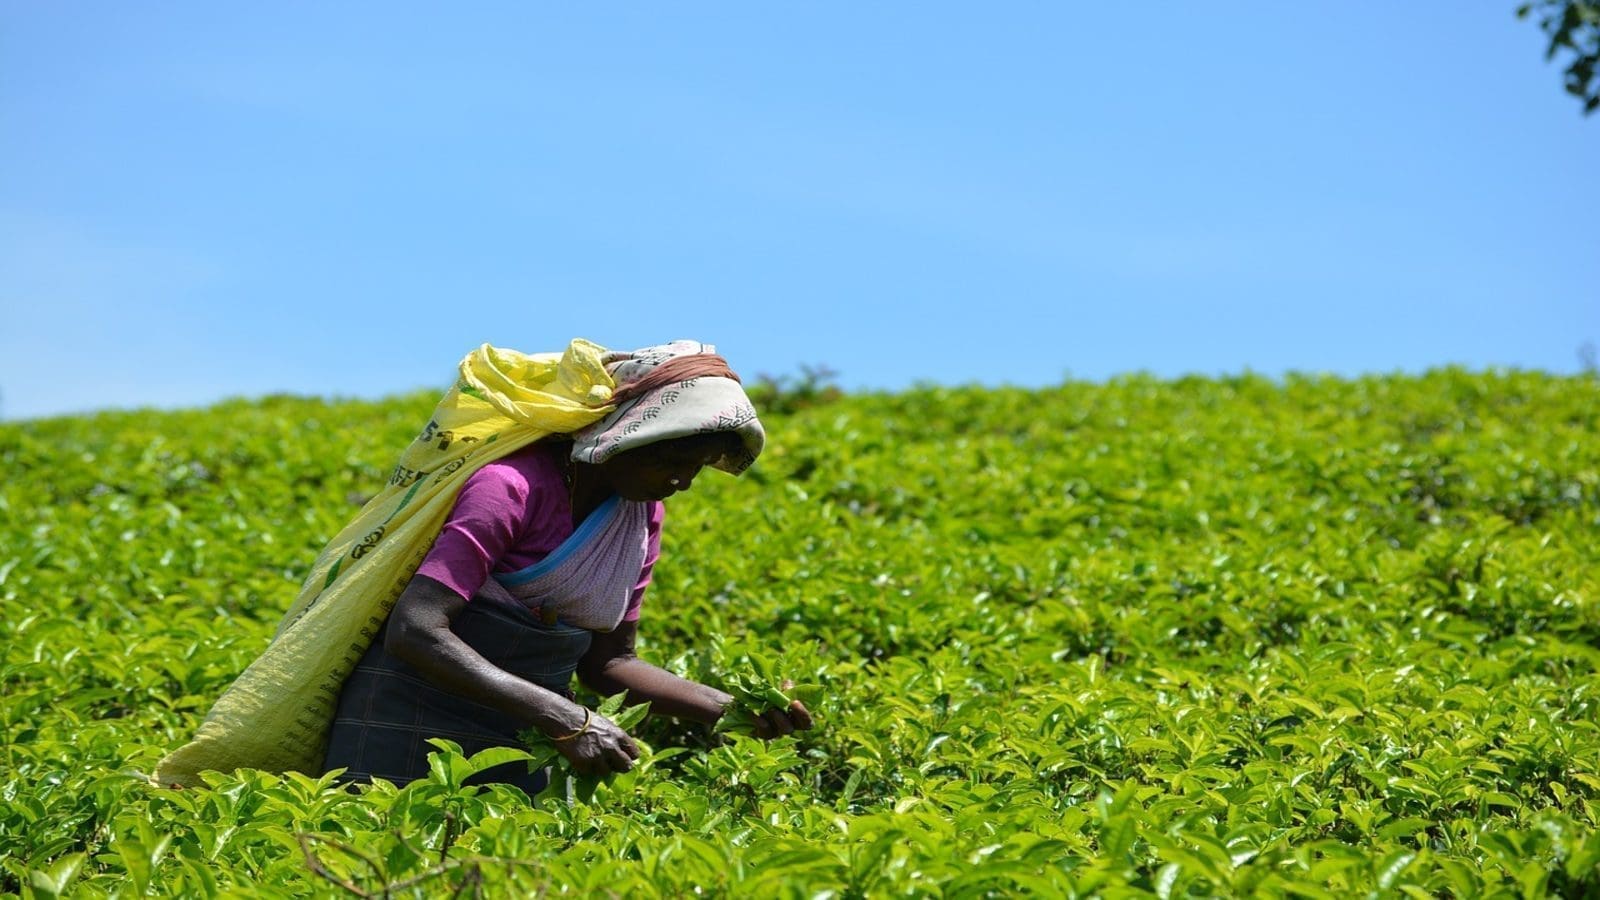 Kenya’s Capital Markets Authority calls for Limuru Tea Company’s board restructuring to reflect shareholding structure